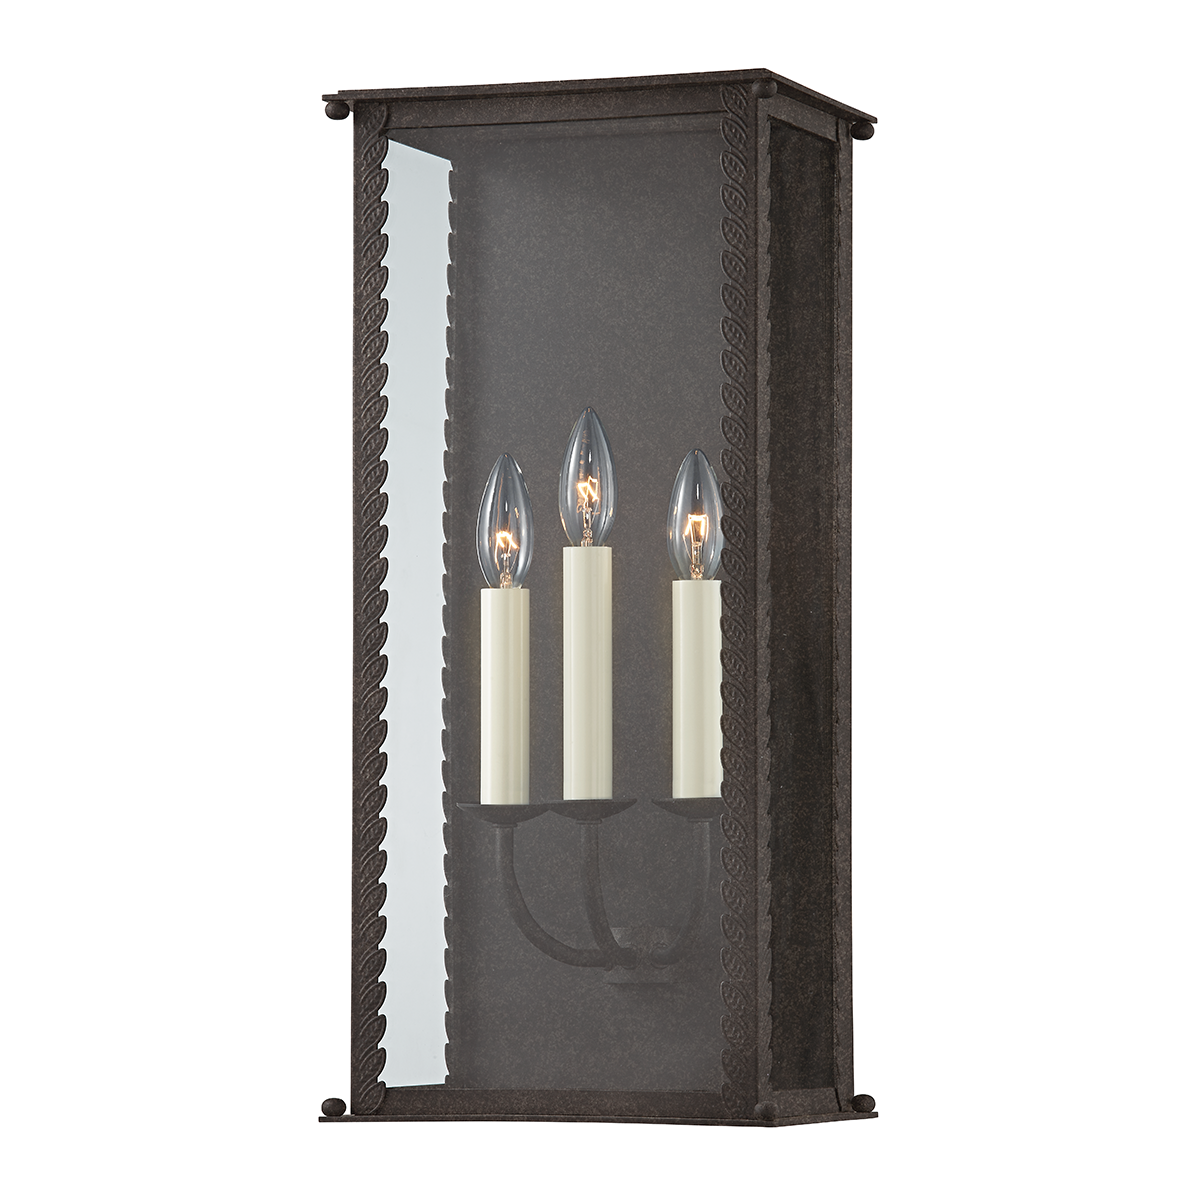 Troy Lighting 3 LIGHT LARGE EXTERIOR WALL SCONCE B6713